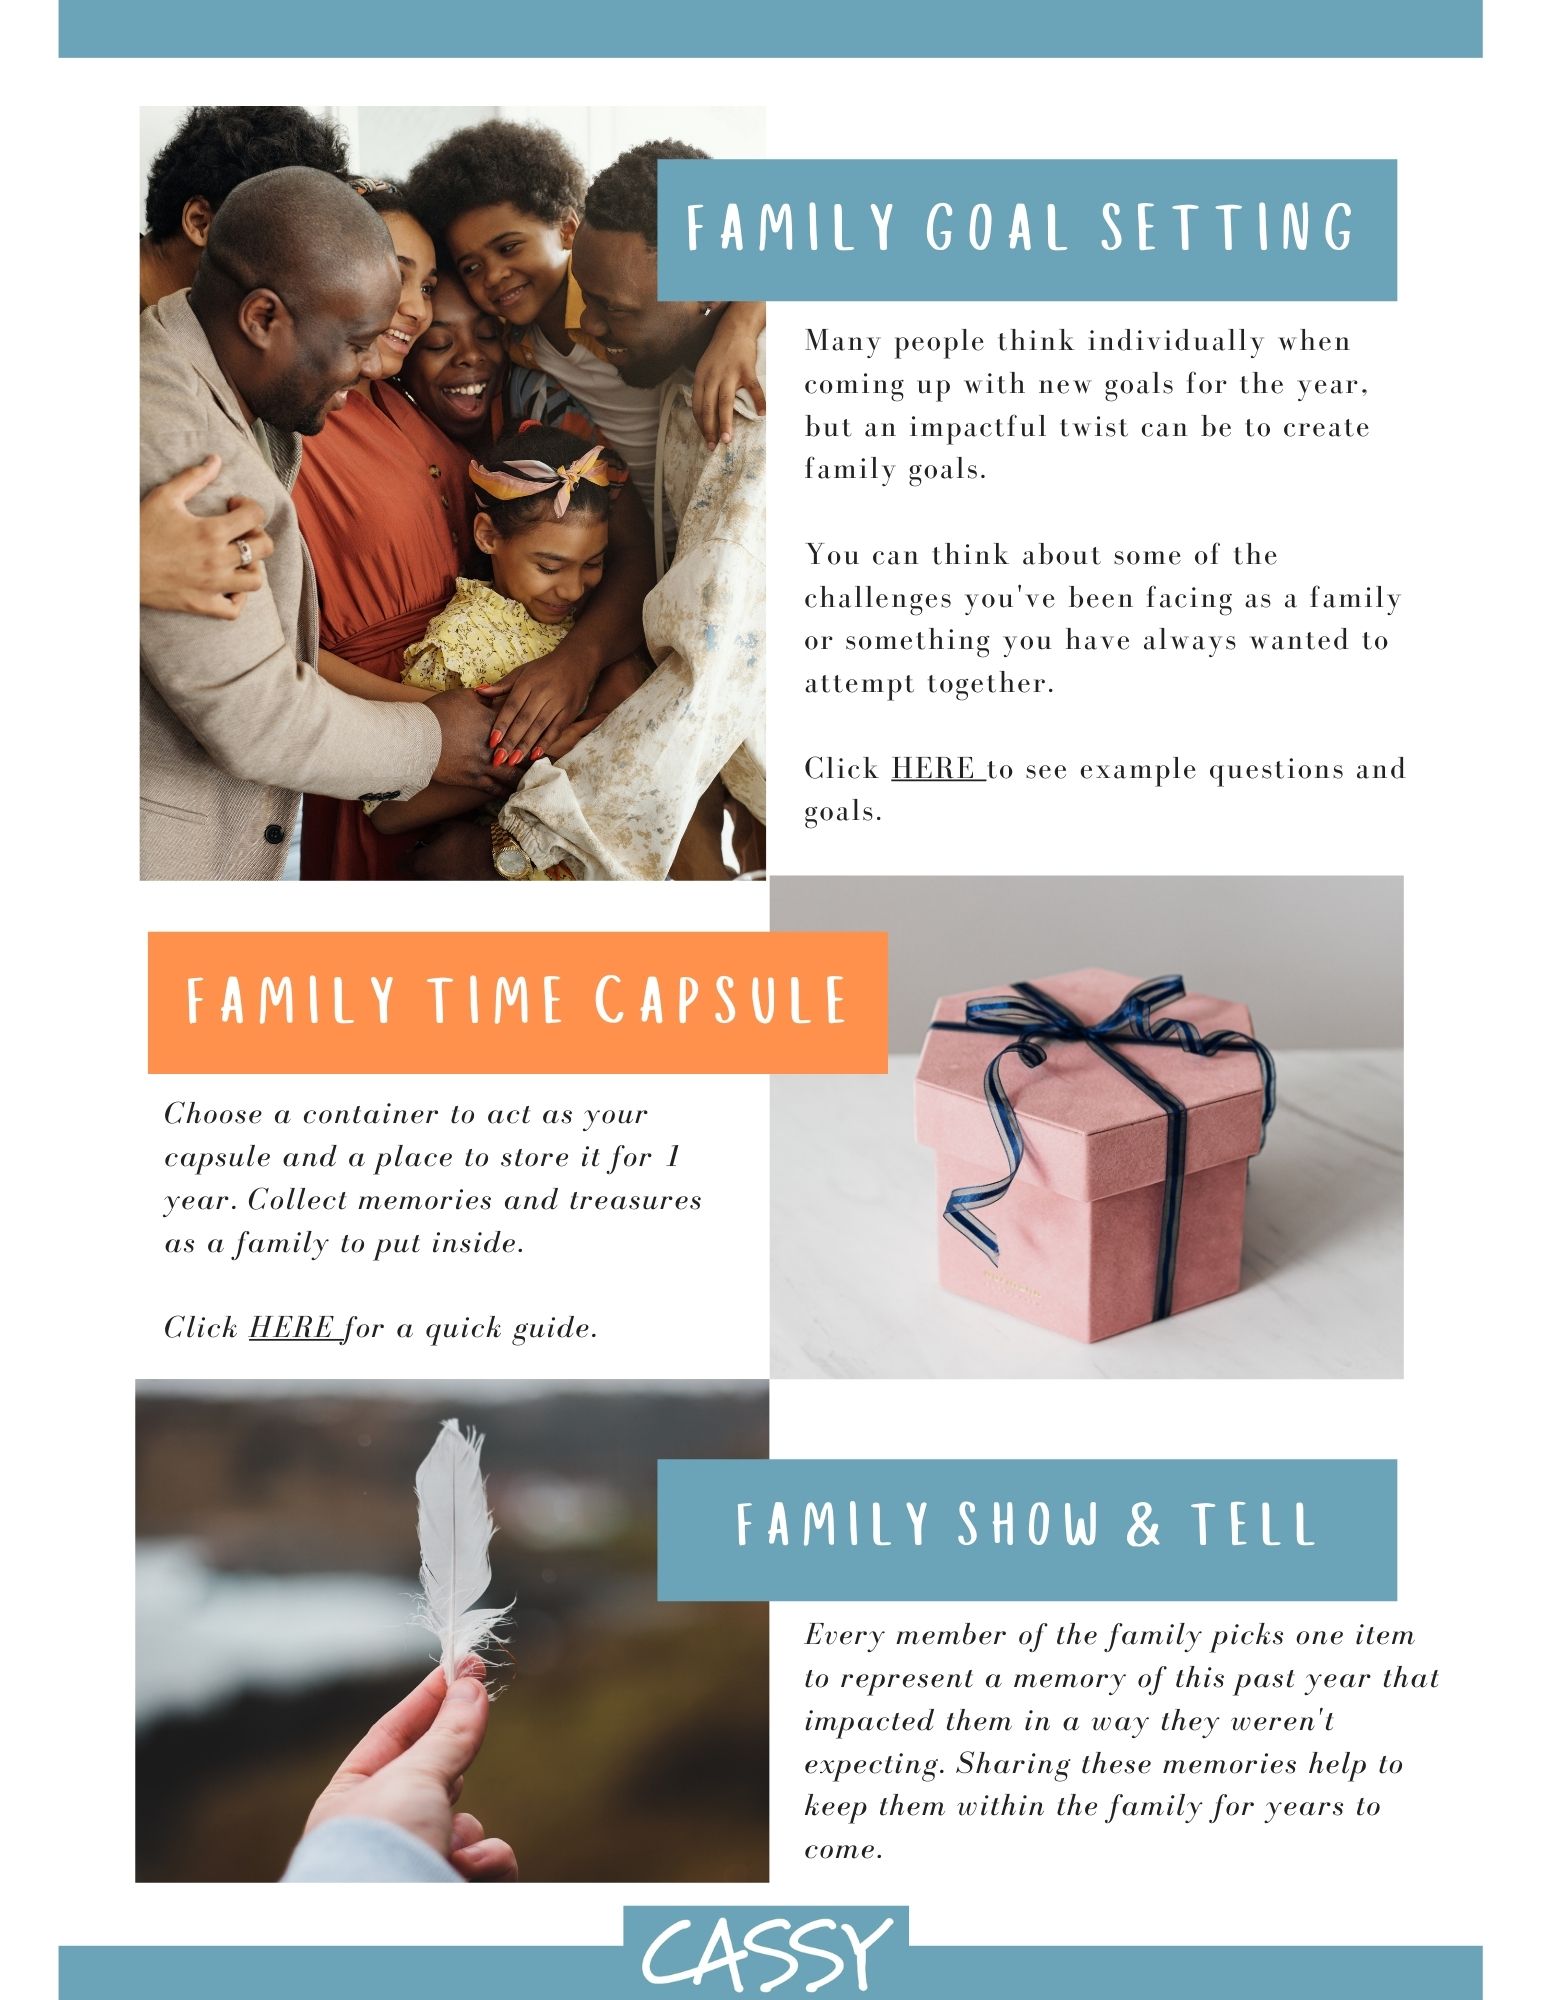 Holiday traditions may include family goal setting, creating a family time capsule, or playing family show & tell, where each member picks one item to represent a memory from the past year